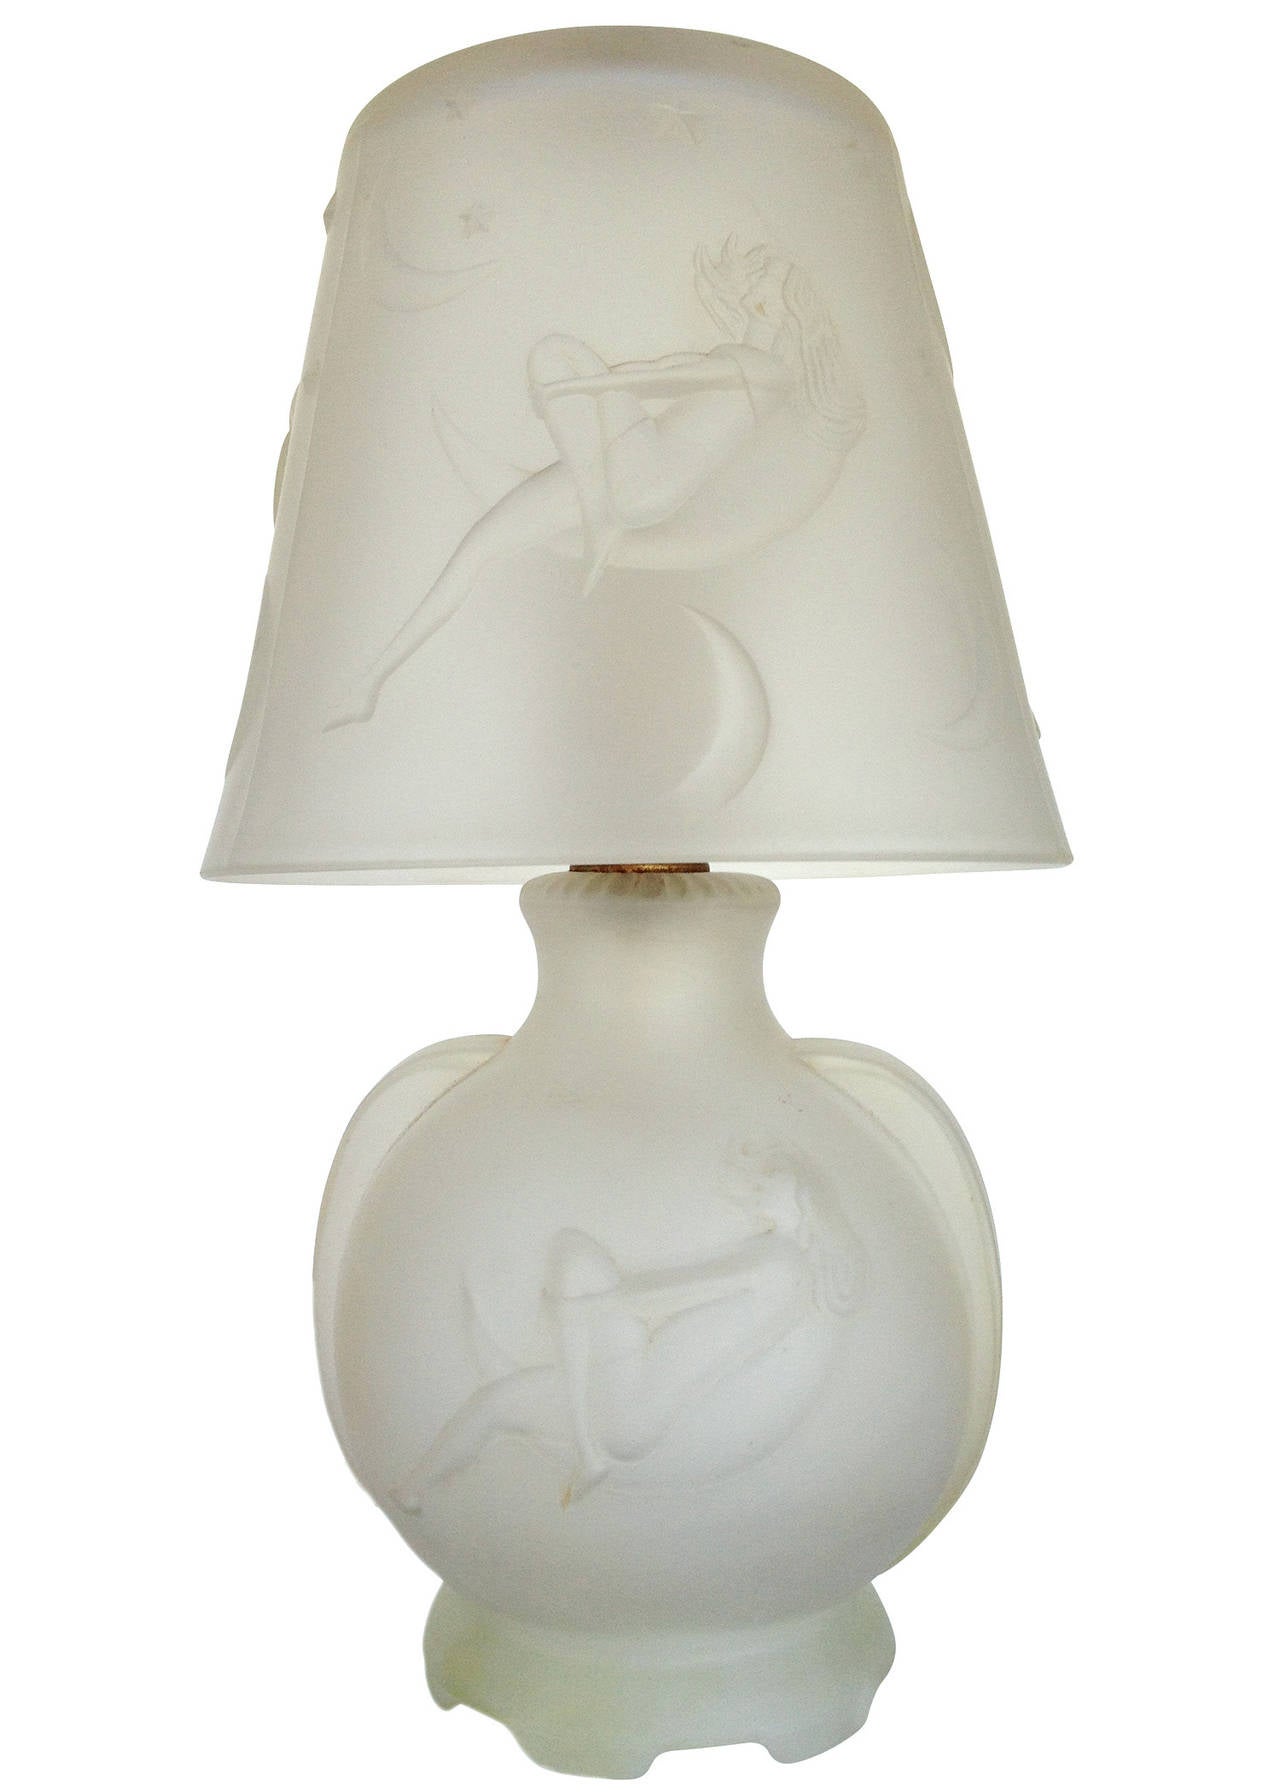 This frosted glass boudoir lamp features a nude woman gazing at the stars inside a crescent moon, made circa 1920. This portrait can be seen along the shade and lamp body in a repeating pattern.

The lamp features a nice Art Deco accent along the